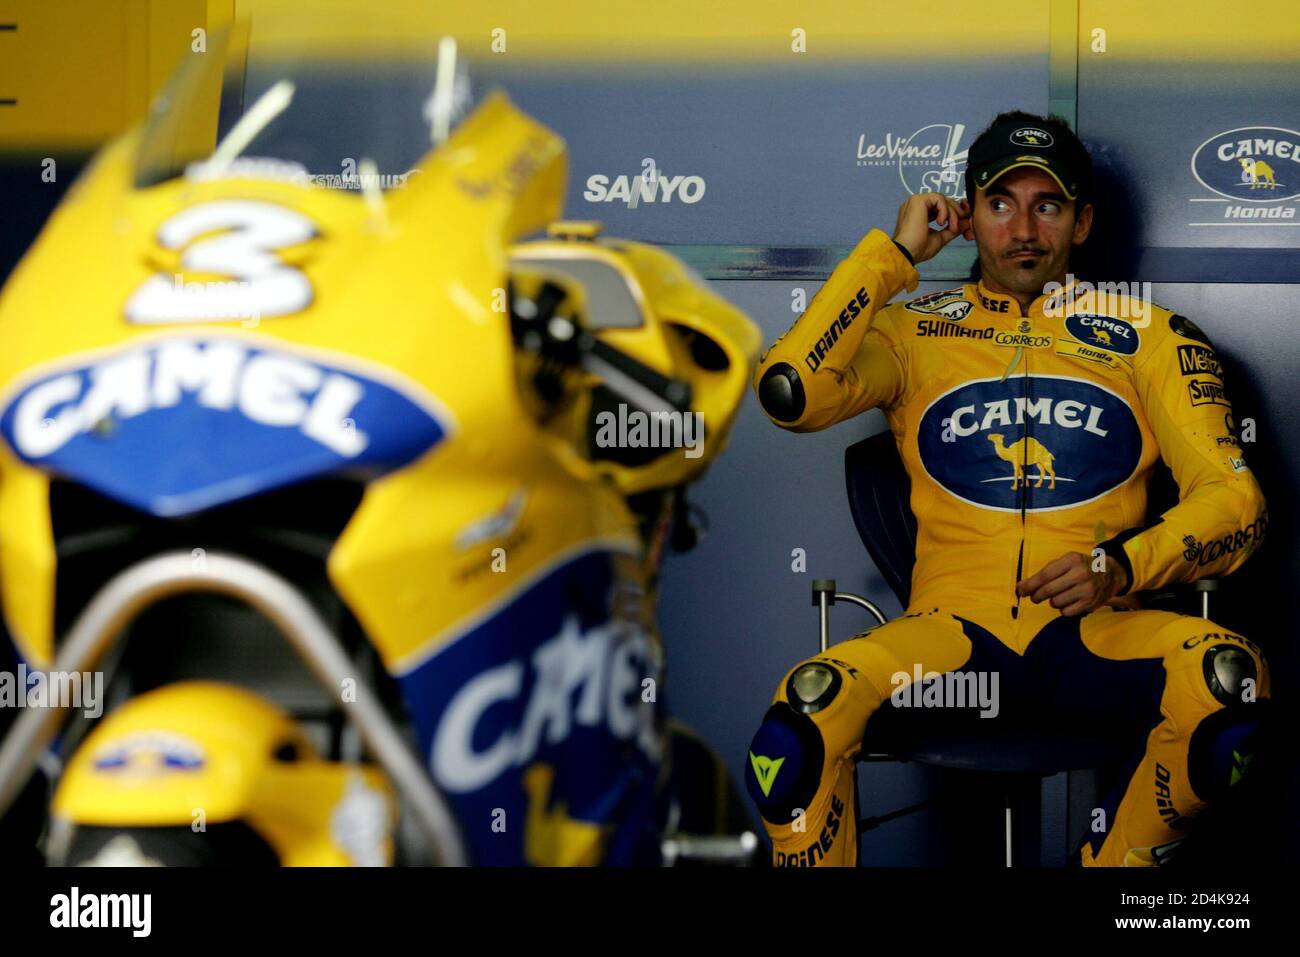 Italian MotoGP rider Max Biaggi of team Honda puts on his ear plug before the start of a qualifying practice session at Malaysia's Sepang International Circuit on October 8, 2004. Malaysian Motorcycle Grandprix 2004 will be held on Sunday. Stock Photo